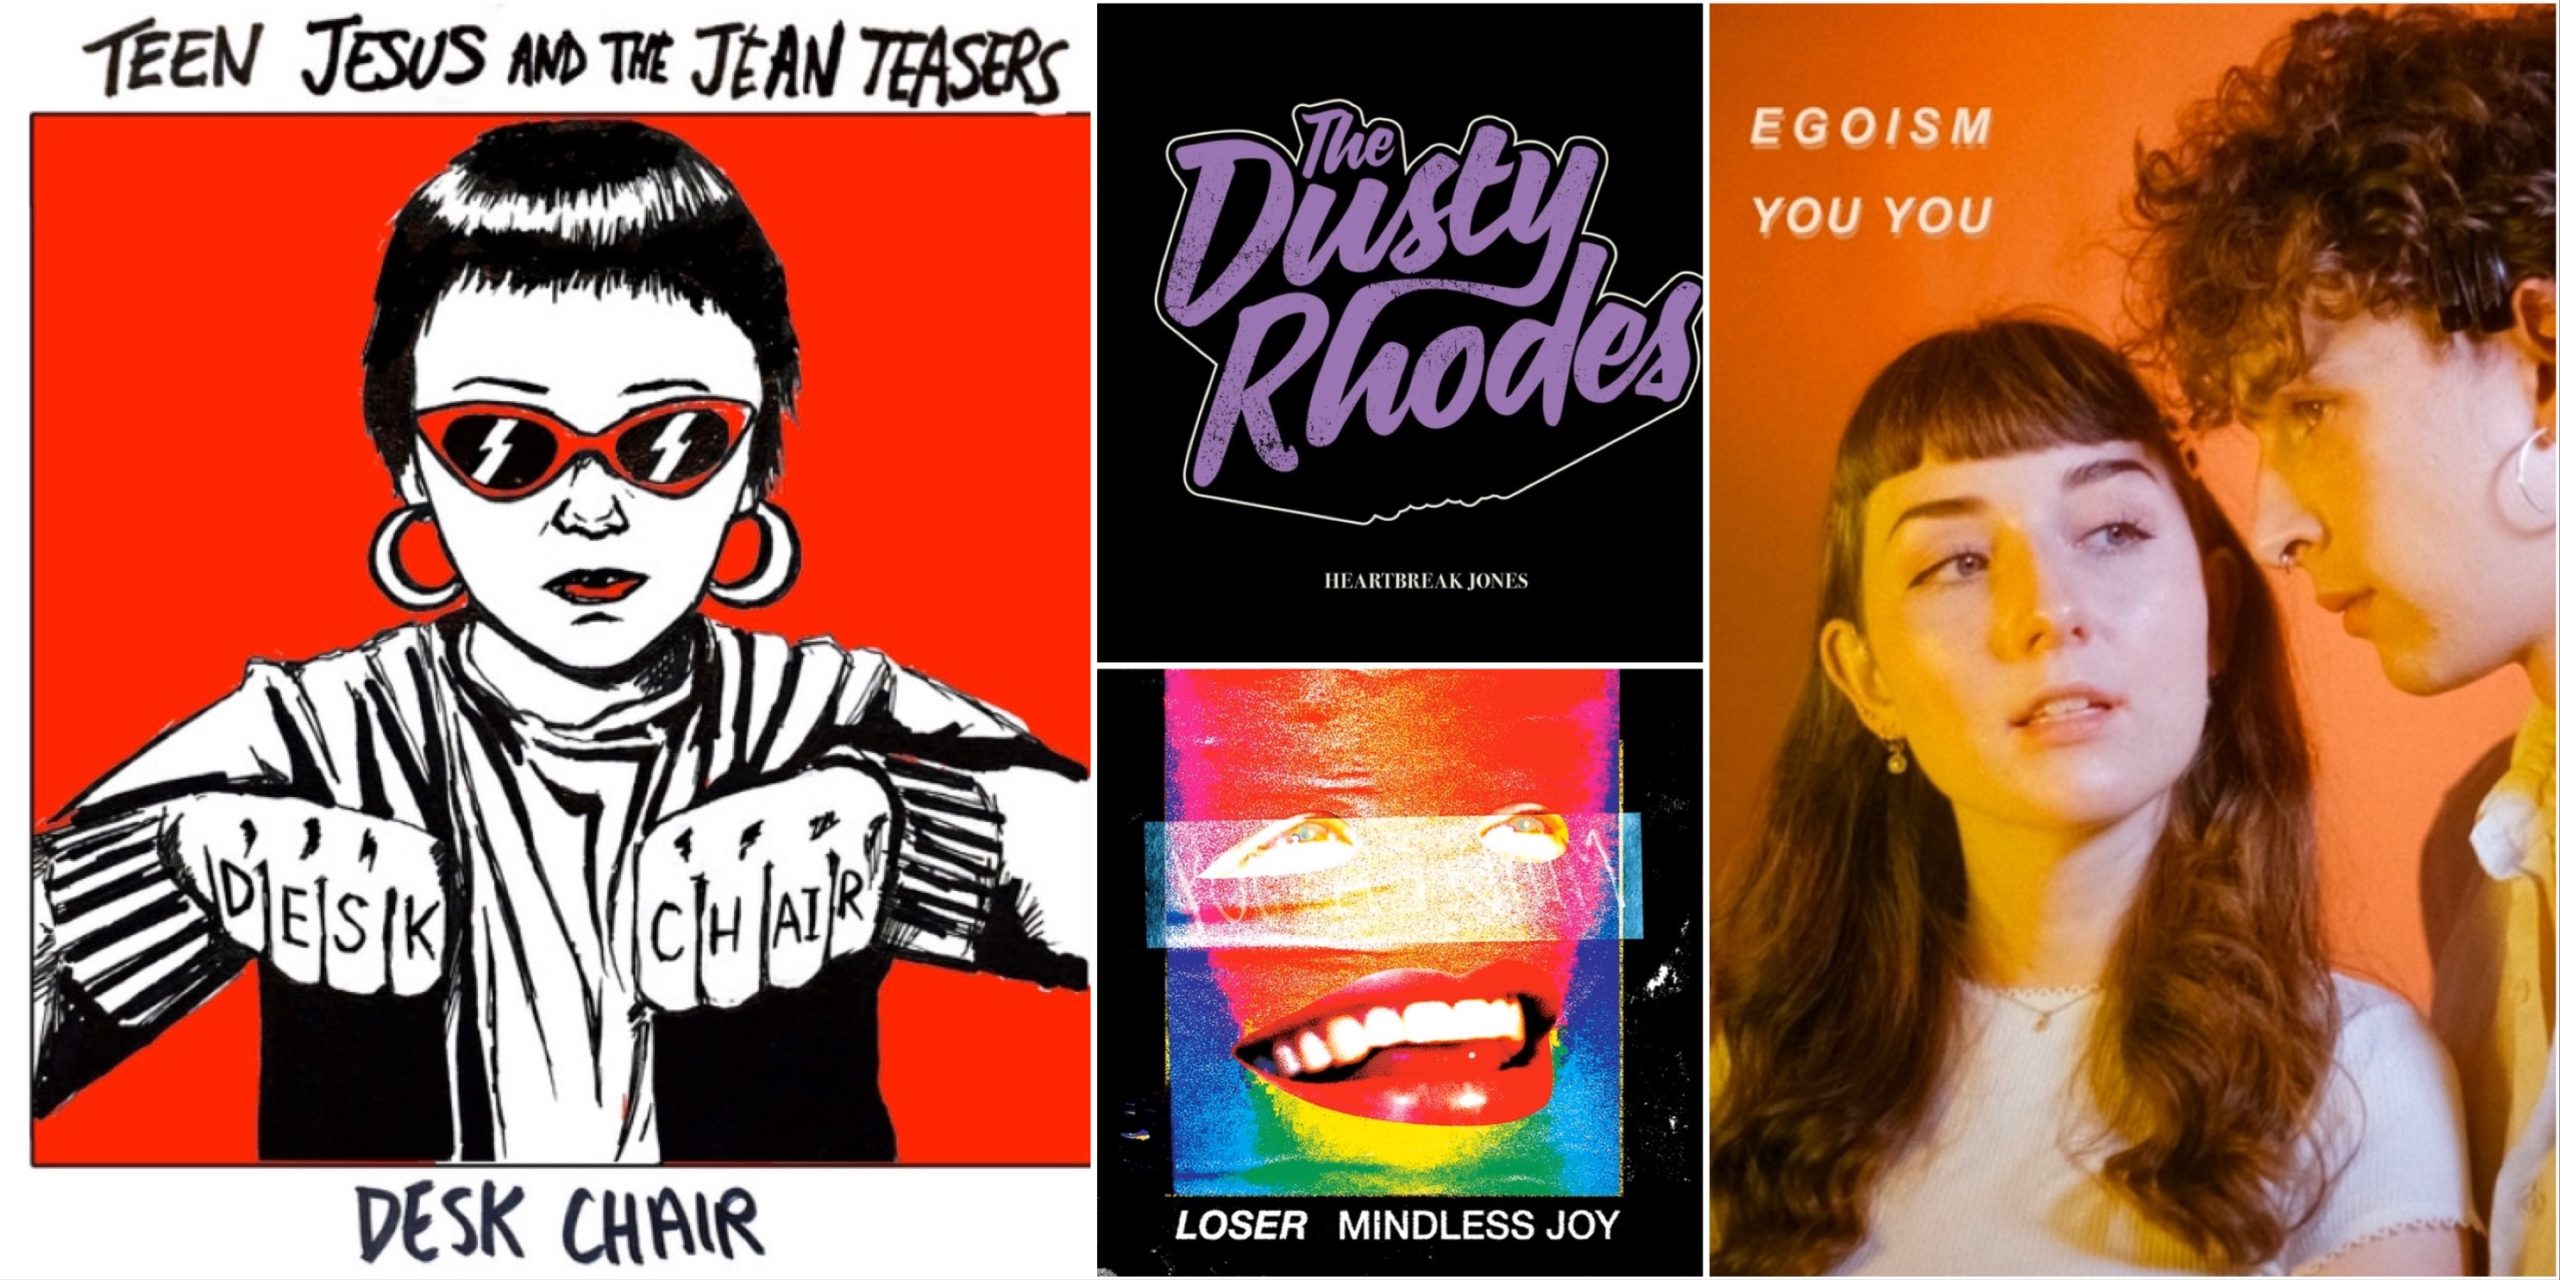 The Underground Stereo - Teen Jesus And The Jean Teasers, Egoism, The Dusty Rhodes, Loser